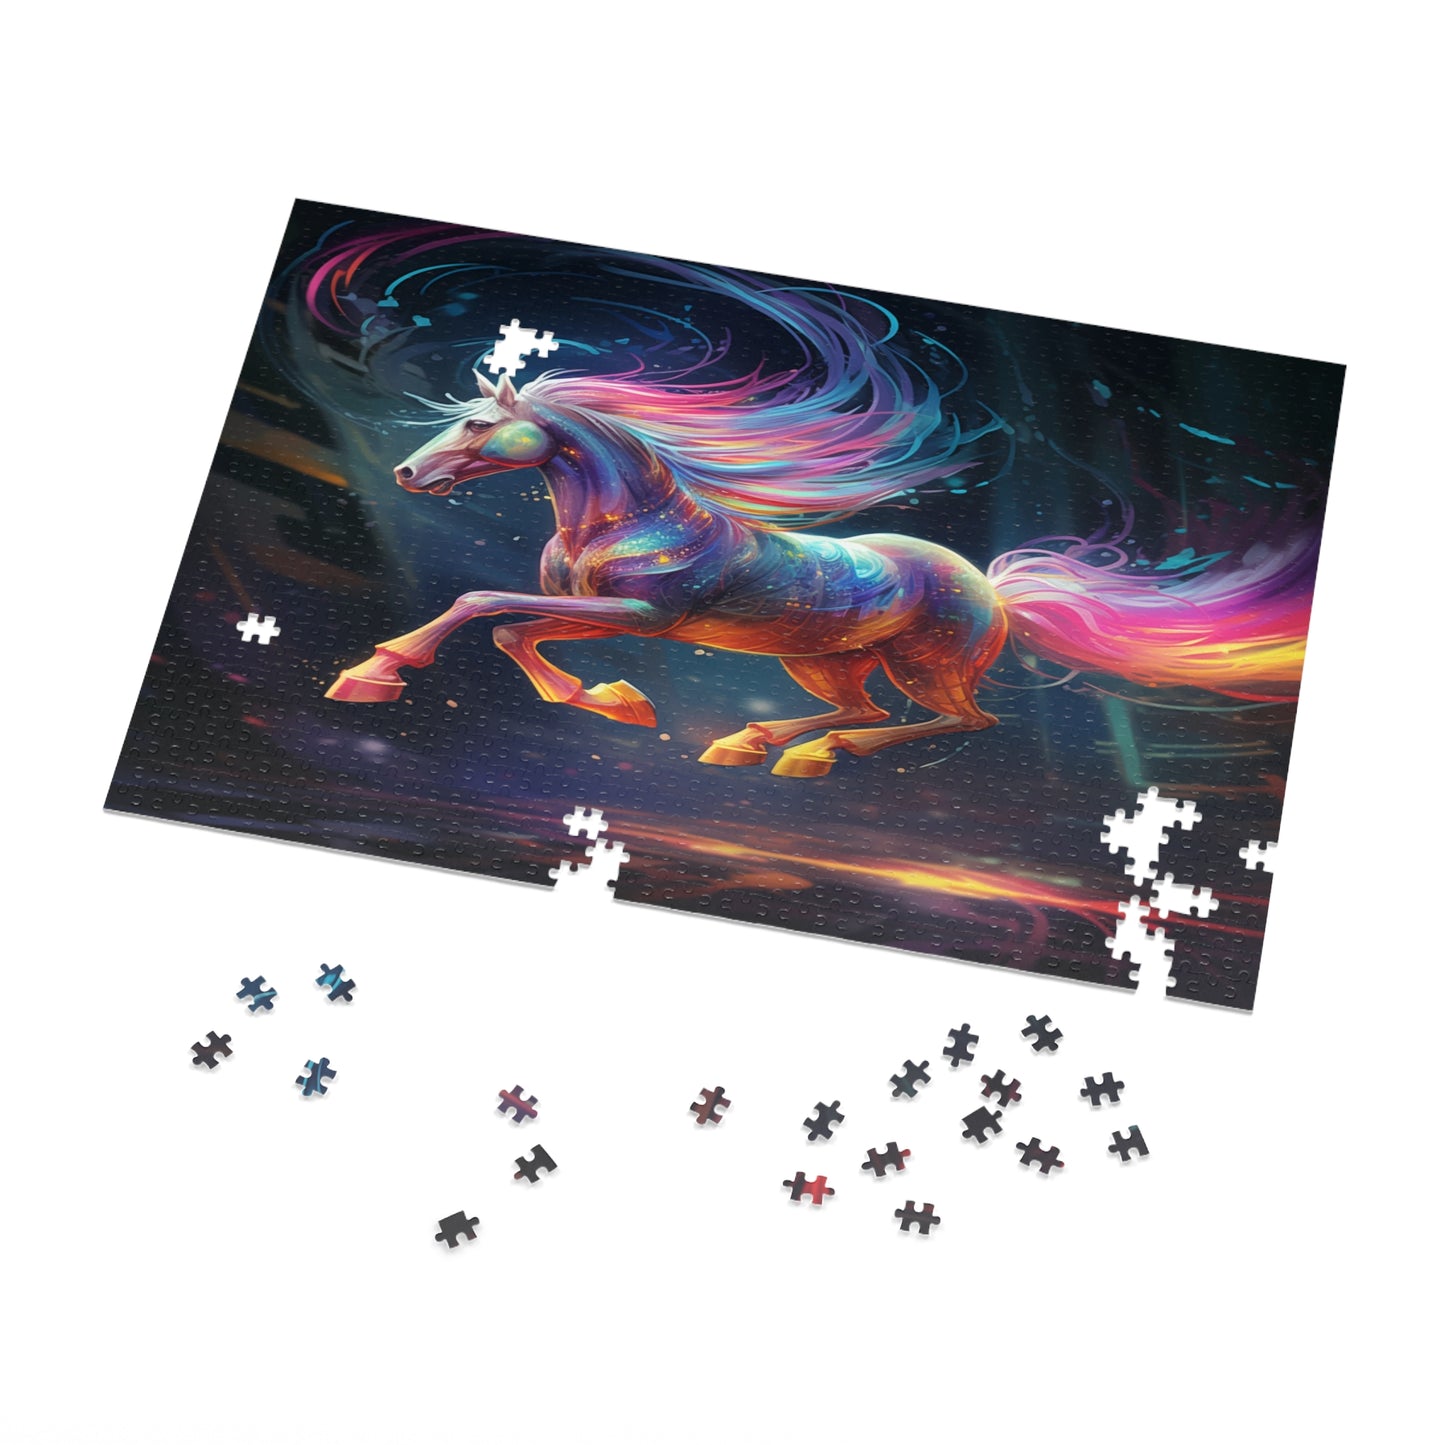 Build a World of Enchantment: "The Magic Pony" Jigsaw Puzzle (500,1000-Piece) Pink Highlights